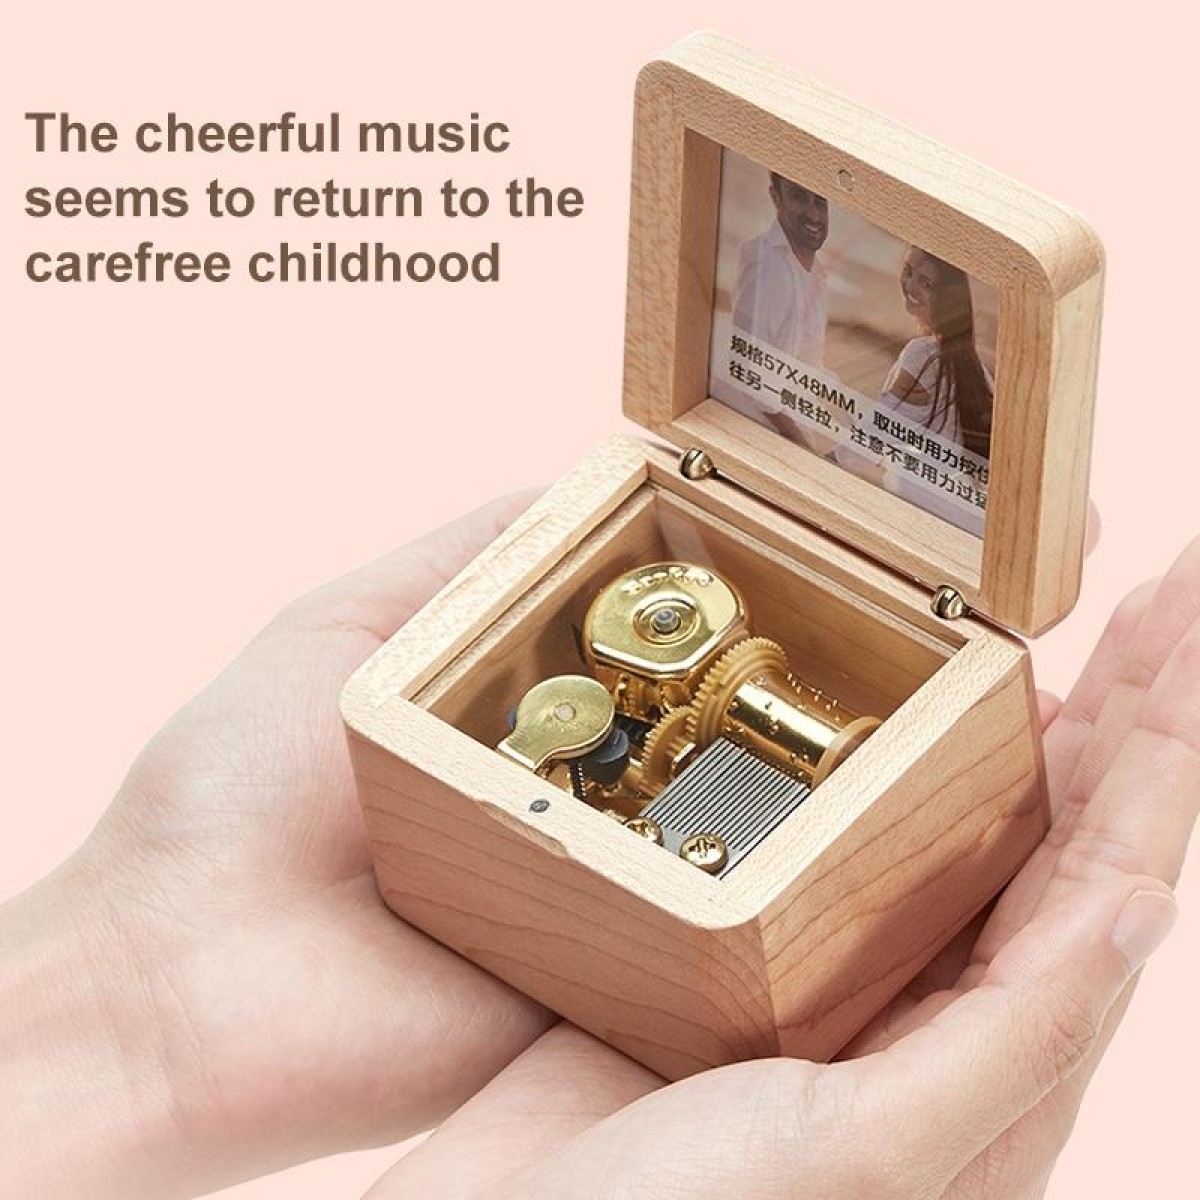 Frame Style Music Box Wooden Music Box Novelty Valentine Day Gift,Style: Walnut Gold-Plated Movement